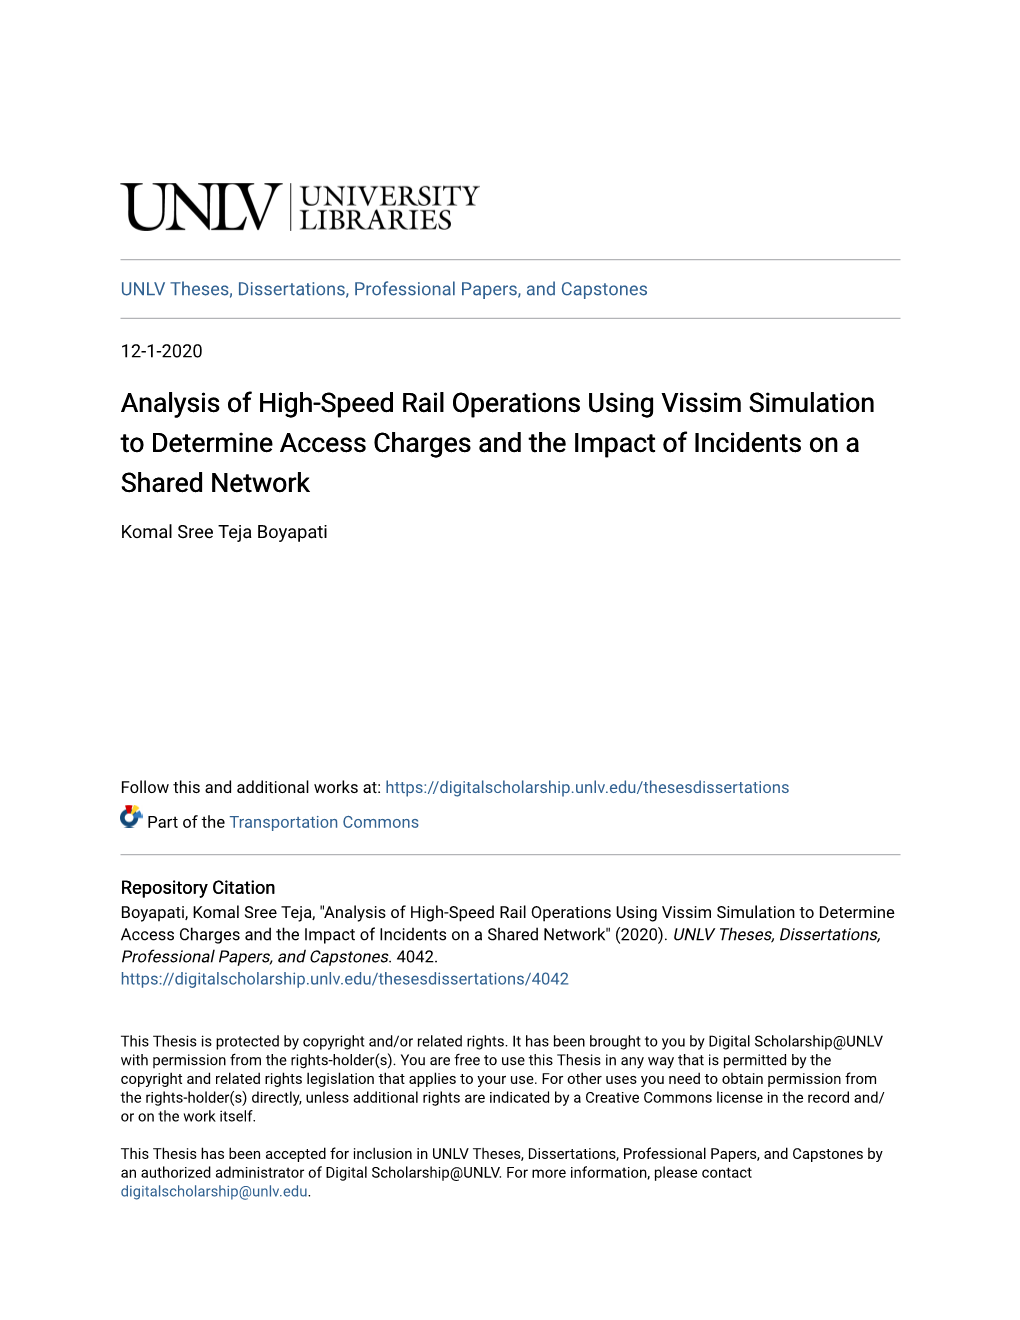 Analysis of High-Speed Rail Operations Using Vissim Simulation to Determine Access Charges and the Impact of Incidents on a Shared Network